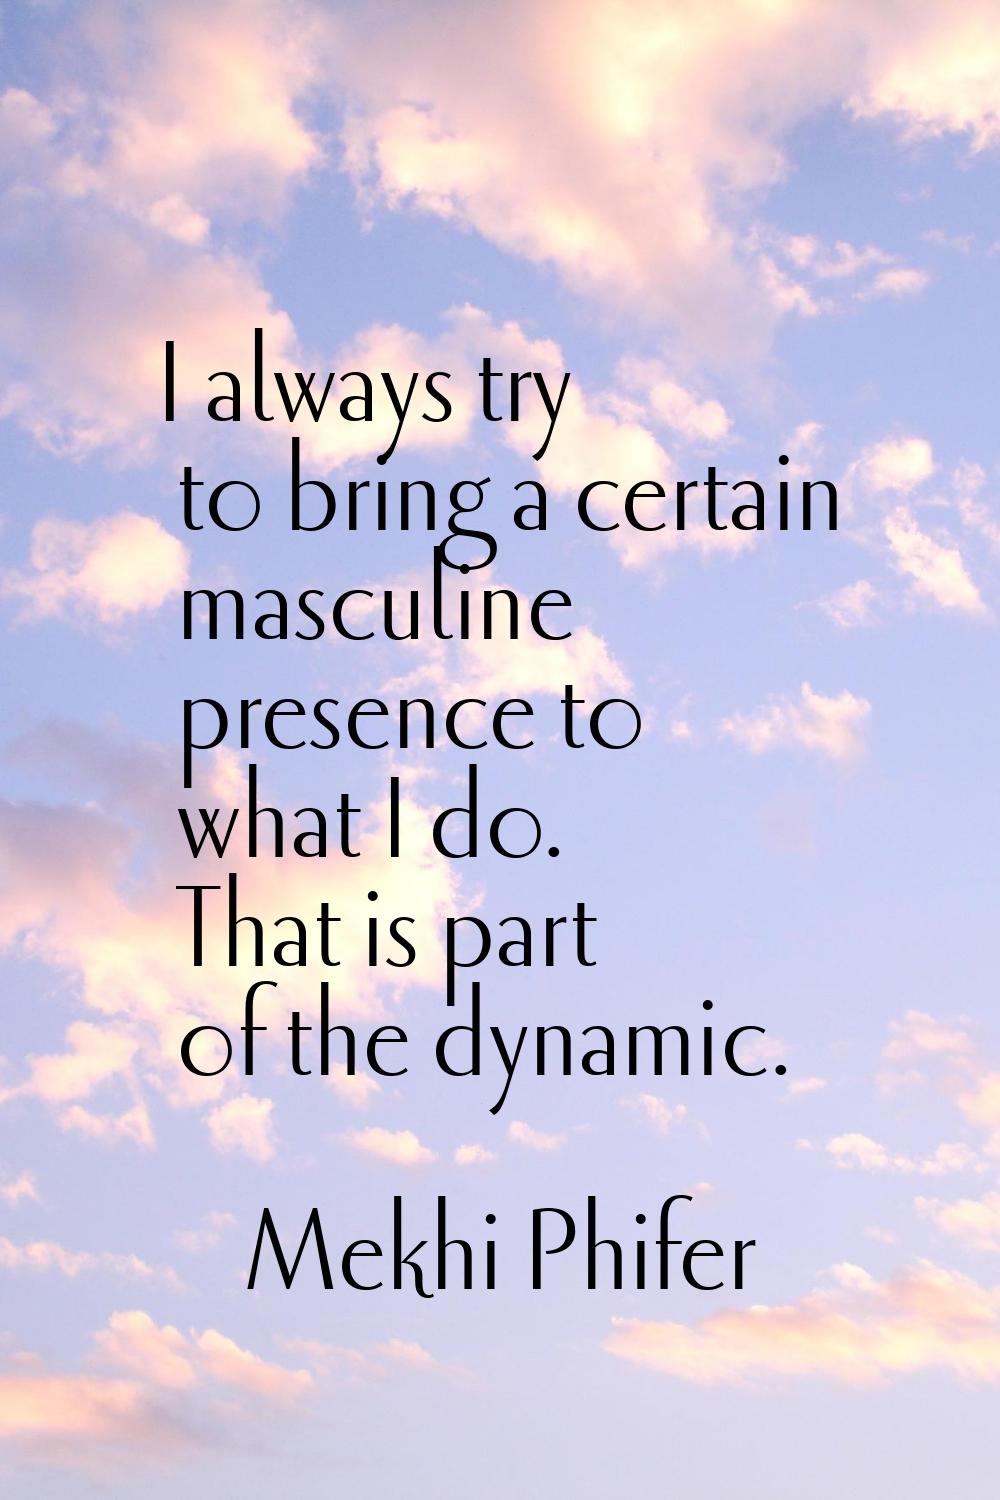 I always try to bring a certain masculine presence to what I do. That is part of the dynamic.